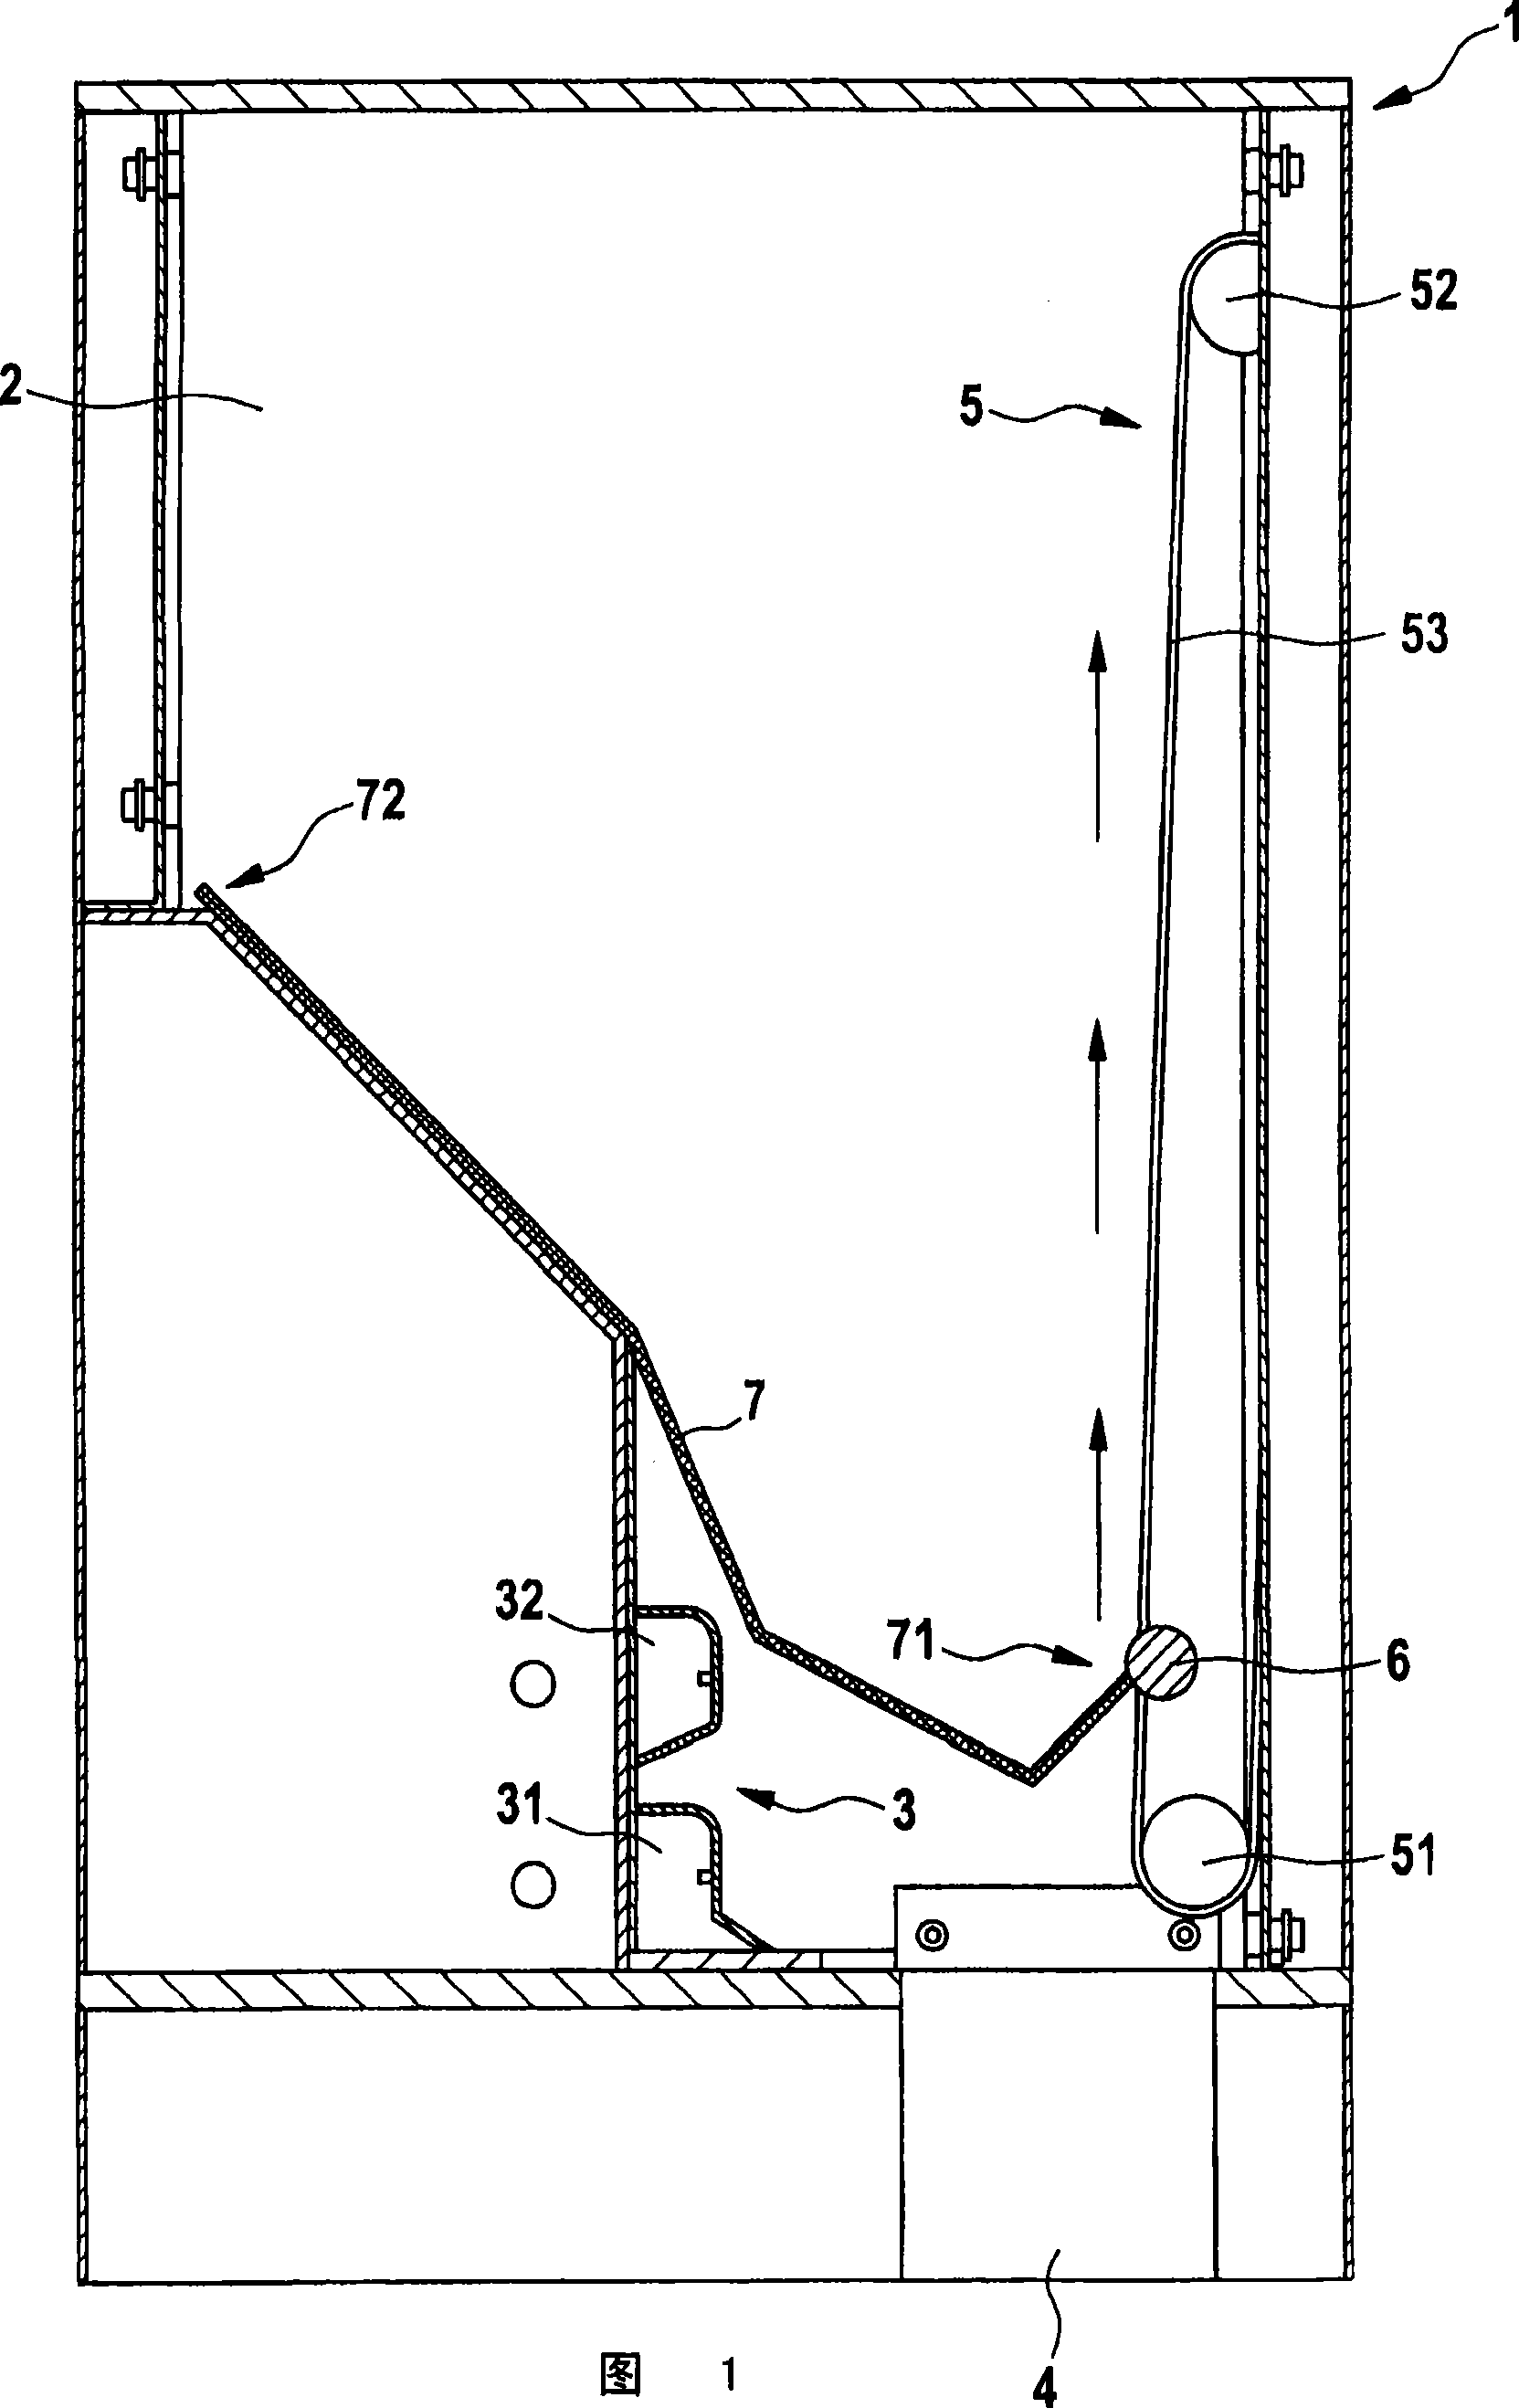 Storage apparatus and method for reducing local pressure in a storage apparatus